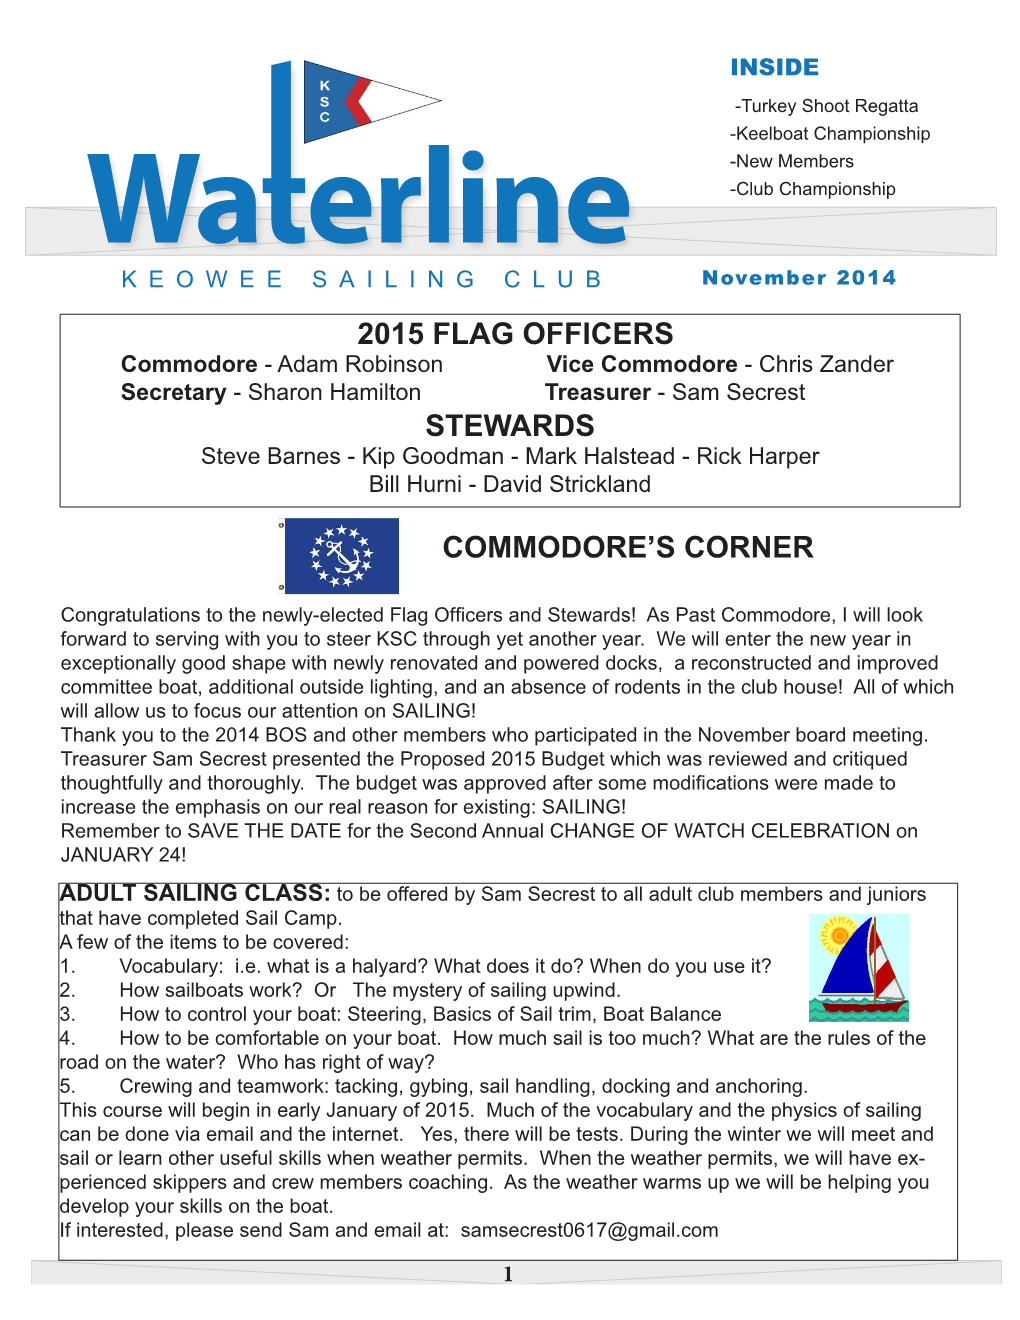 2015 Flag Officers Stewards Commodore's Corner